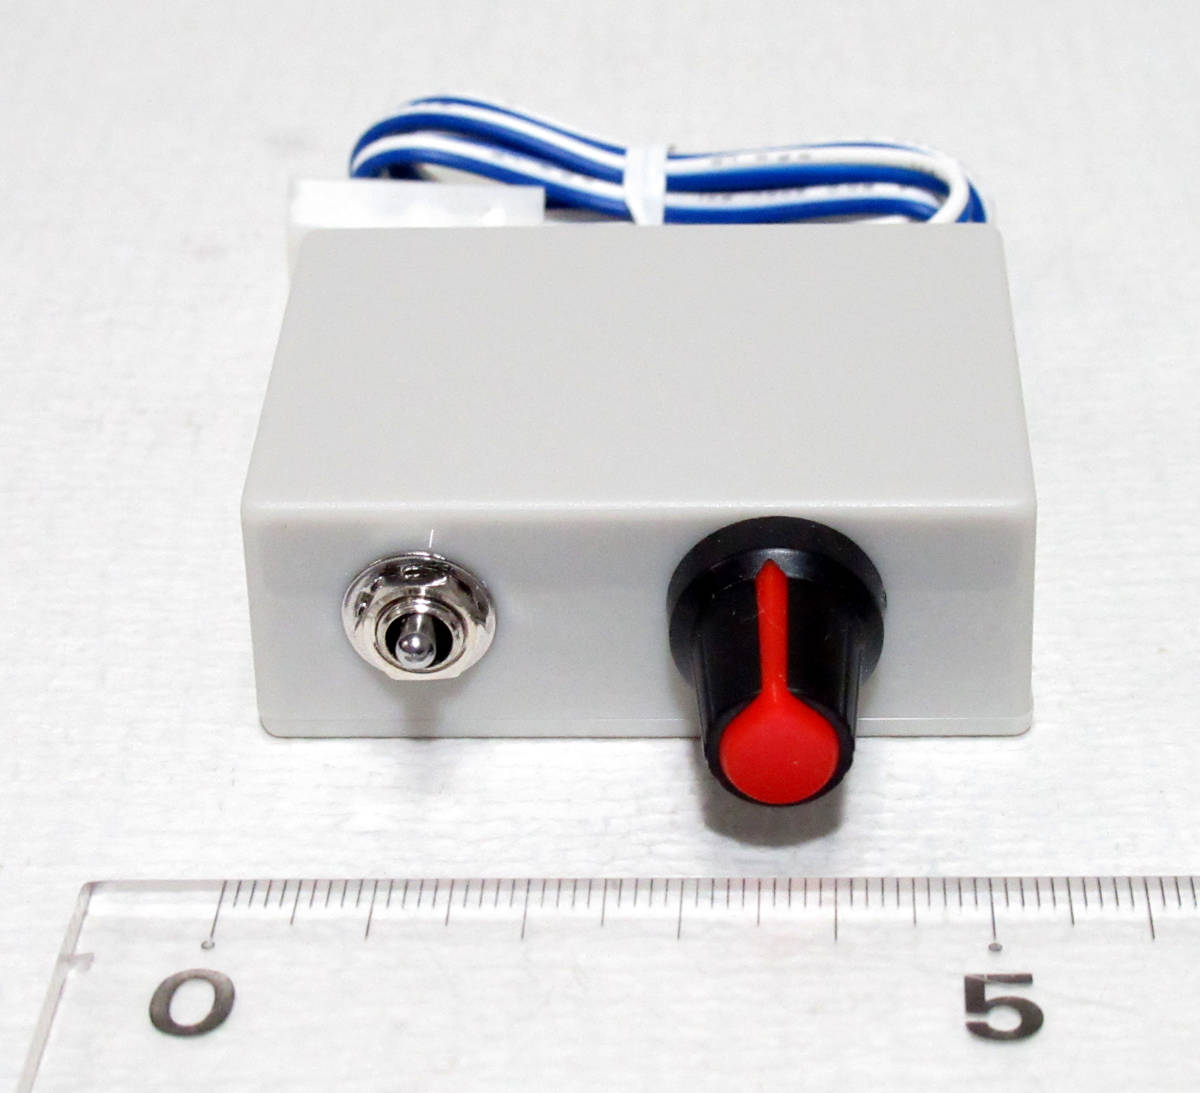  microminiature power pack KATO for PWM less -step speed control 12V1A case size 5.5cm x 4cm x 2cm